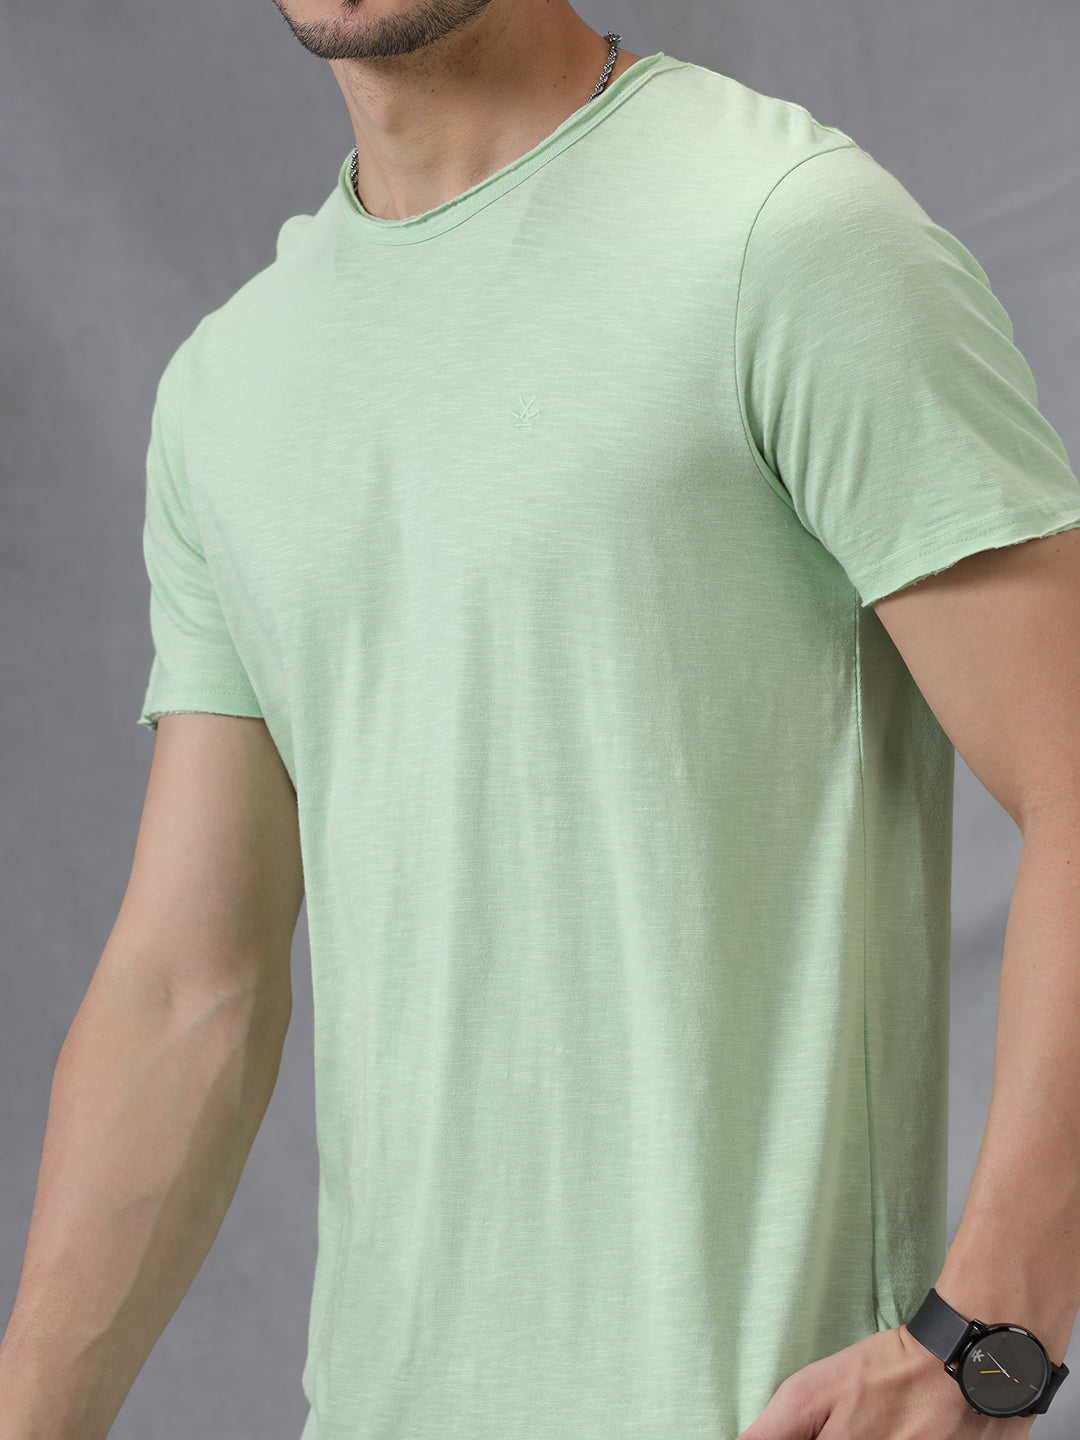 Solid Green Crew Neck T-Shirt